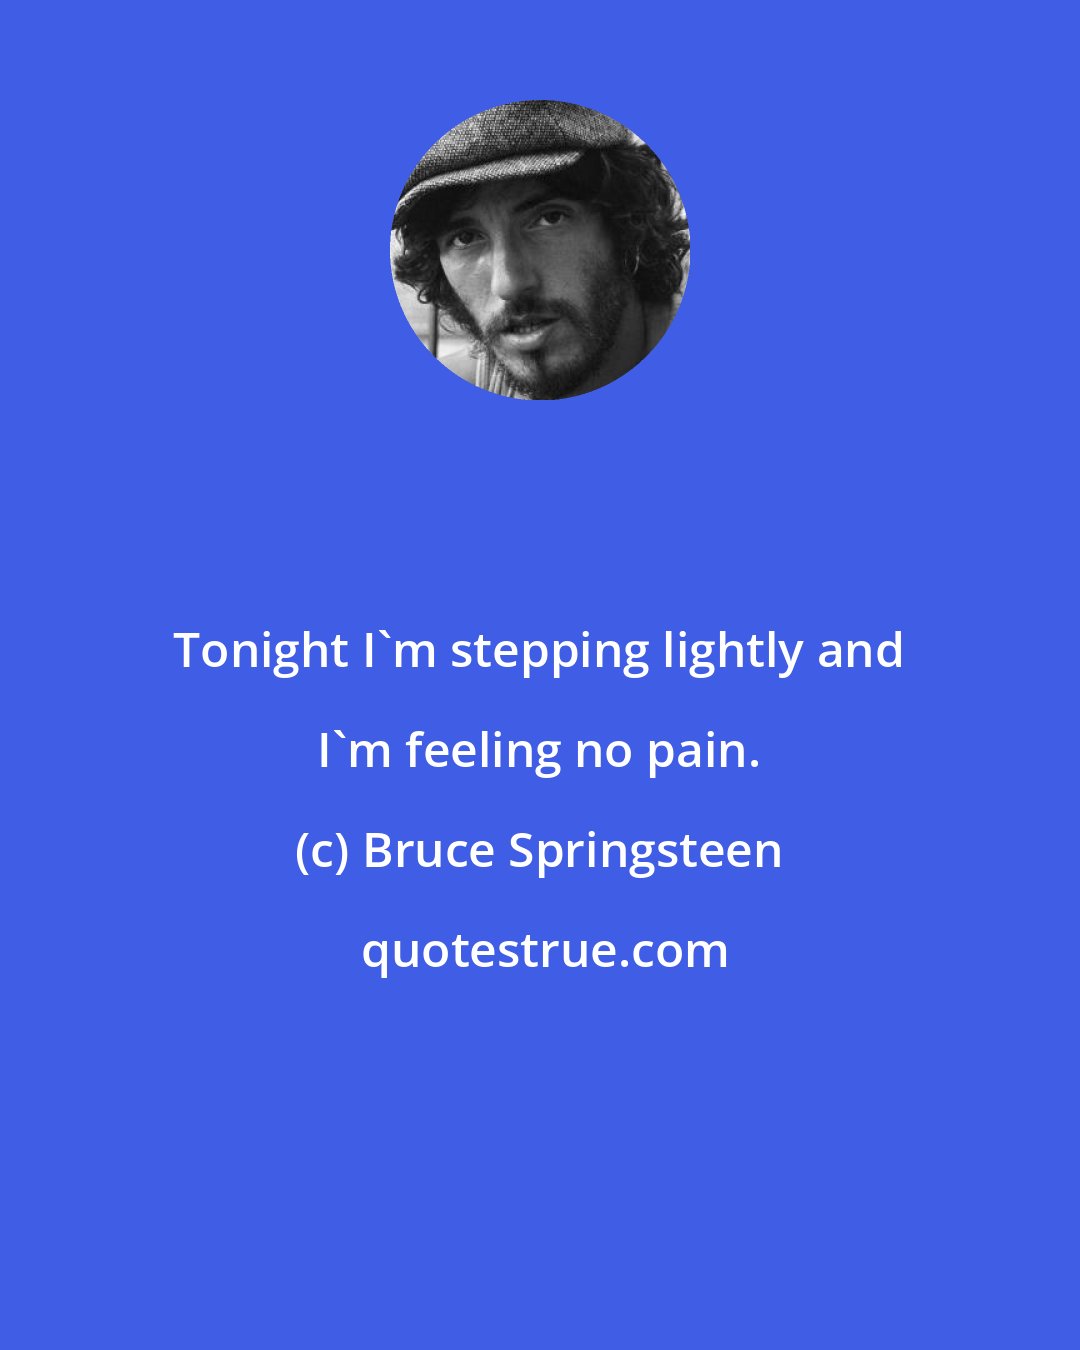 Bruce Springsteen: Tonight I'm stepping lightly and I'm feeling no pain.